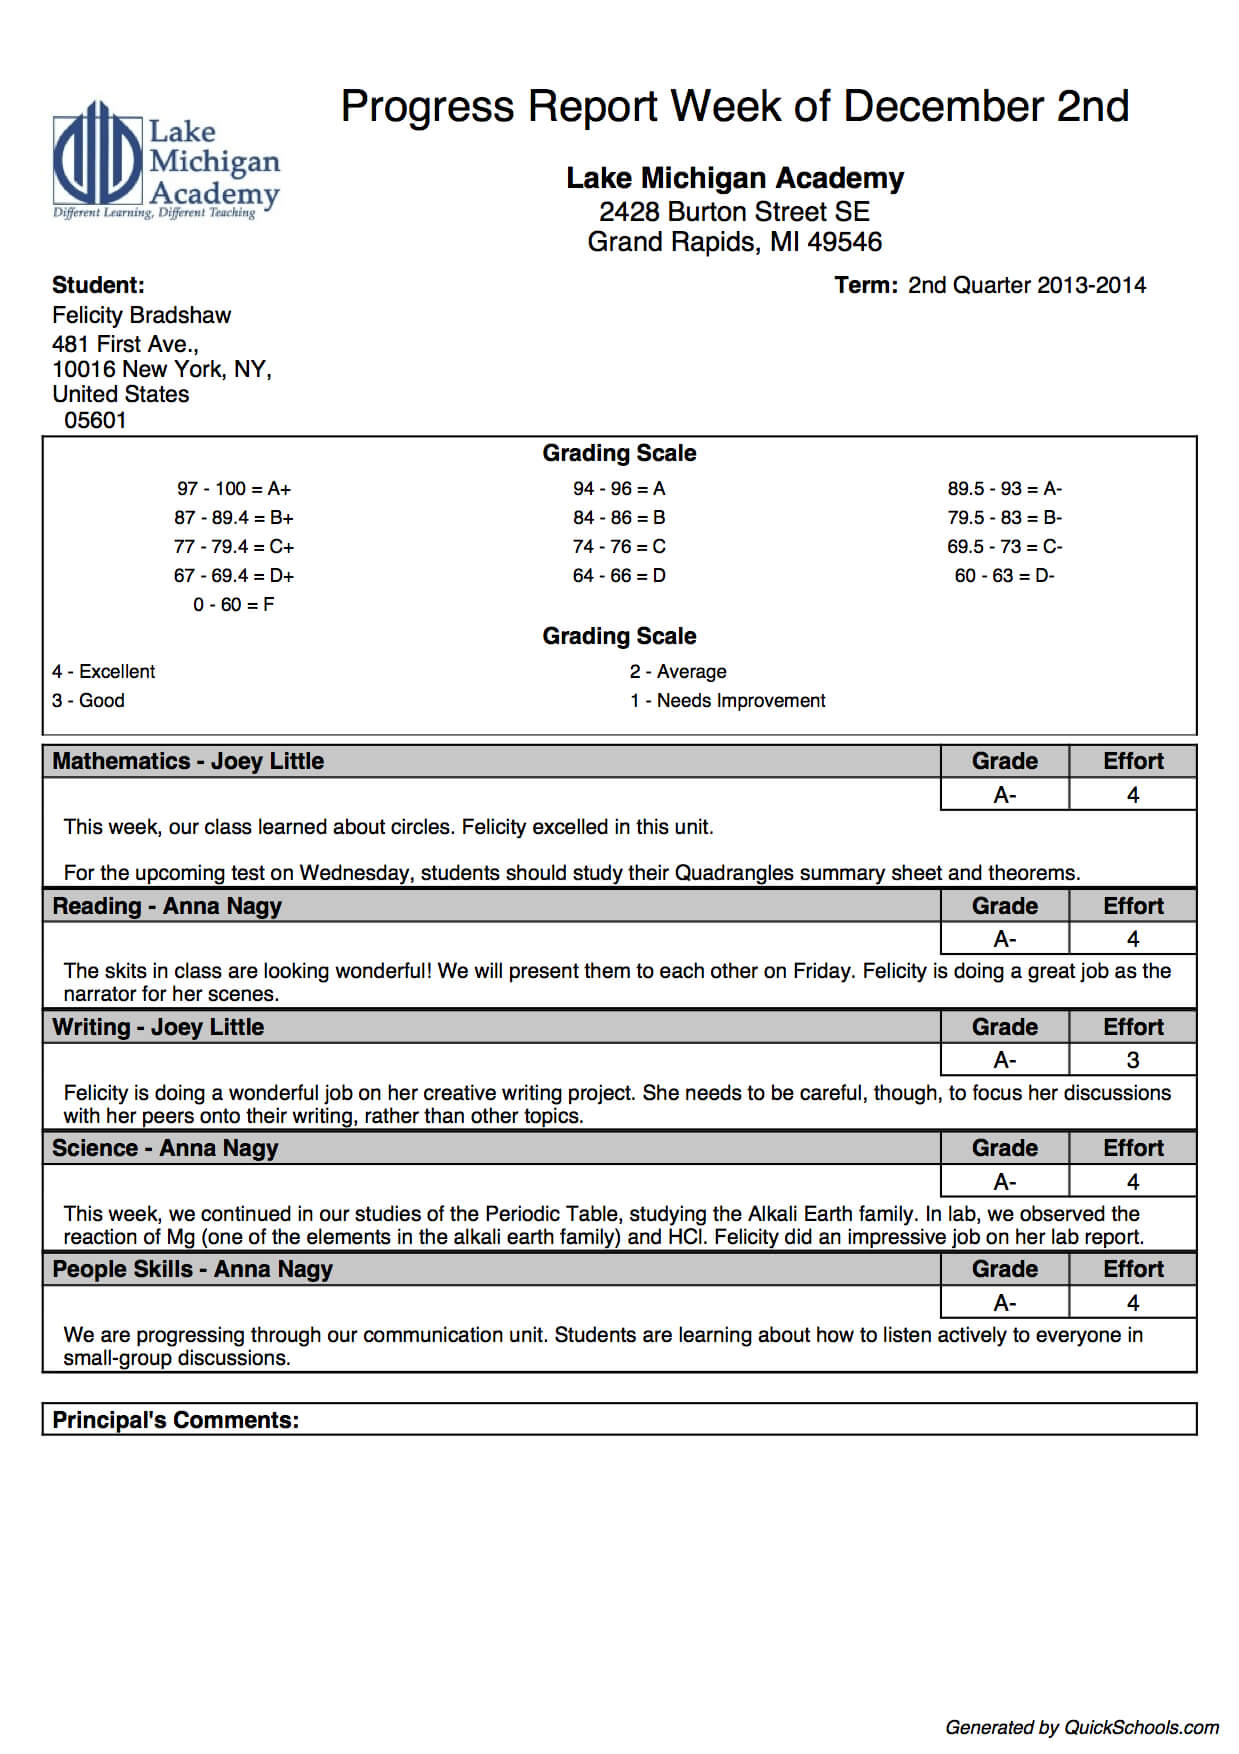 Early Childhood Education | School Management & Student Pertaining To College Report Card Template